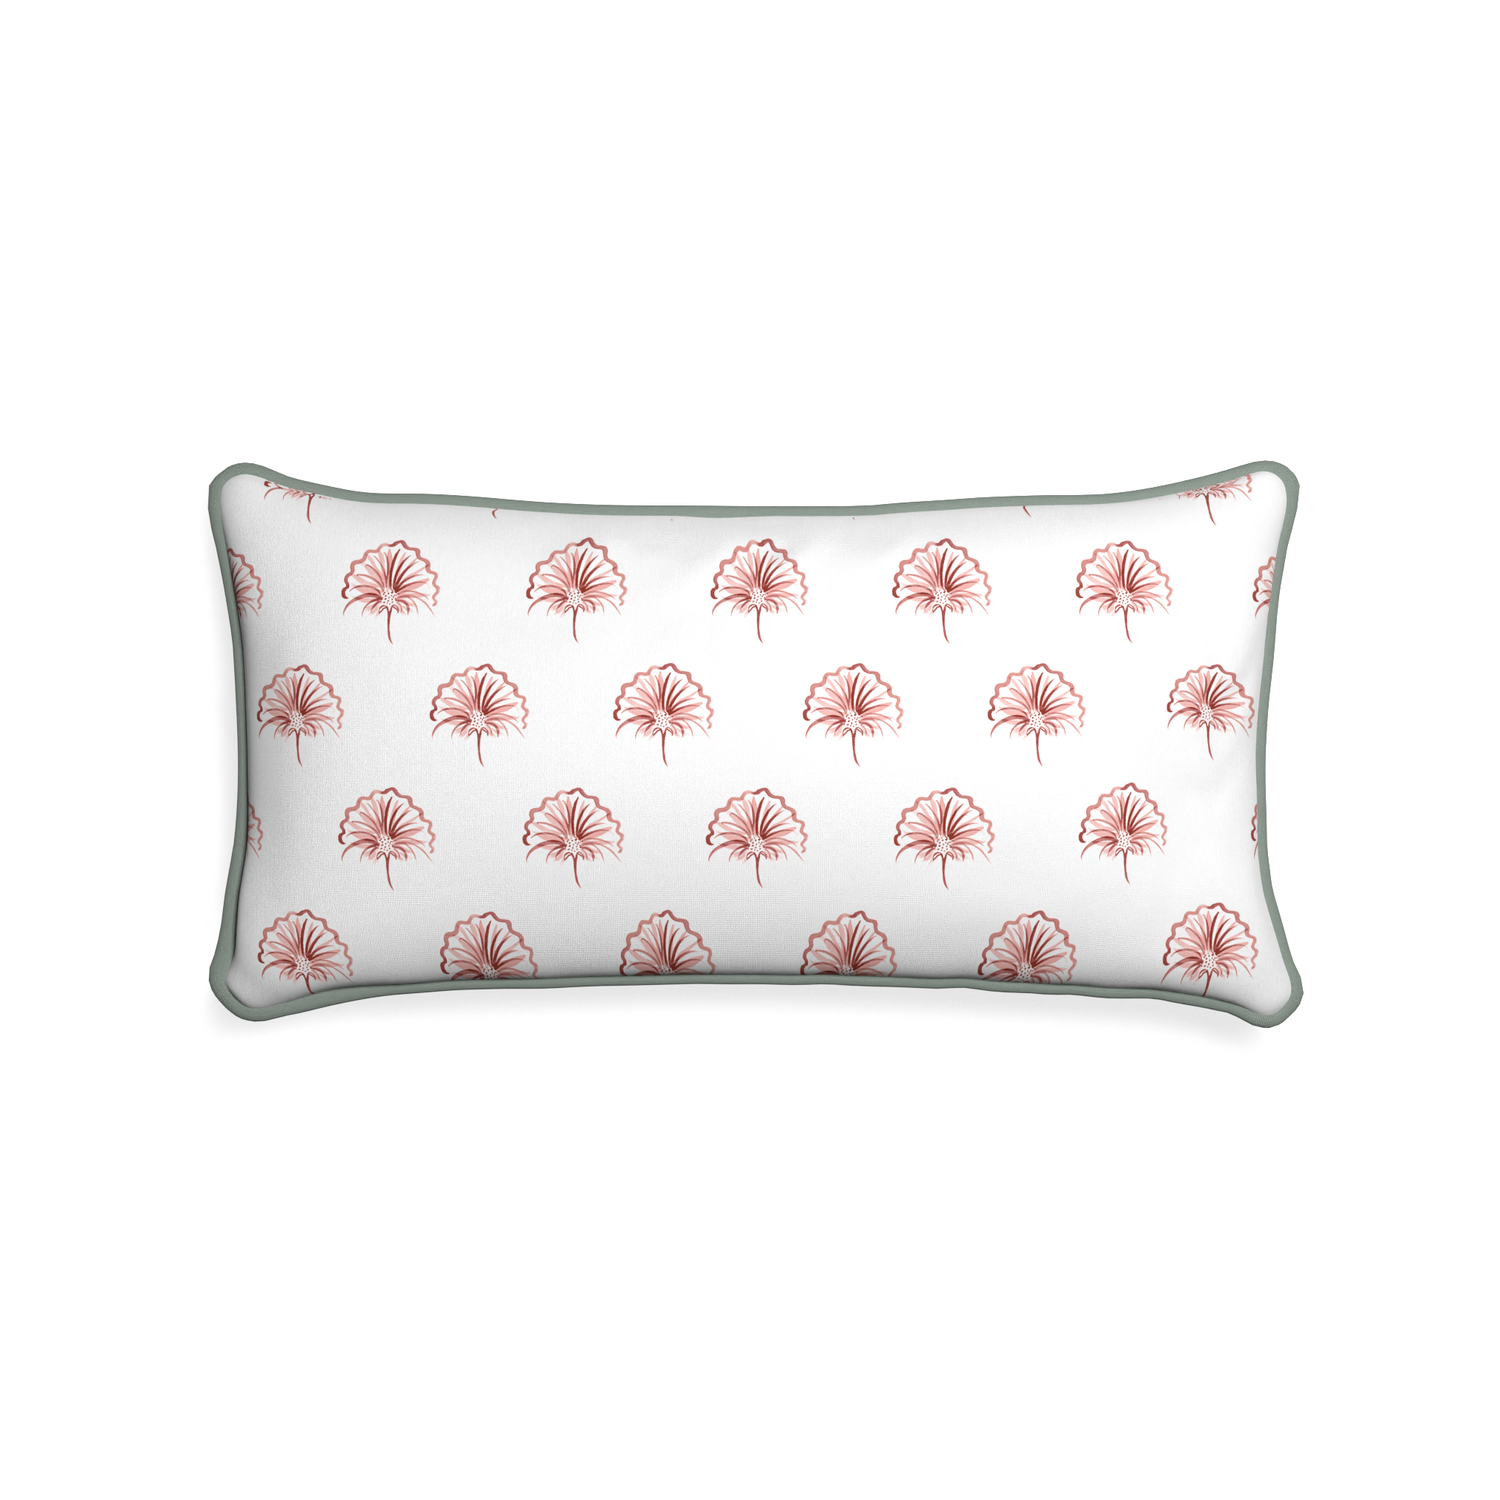 Midi-lumbar penelope rose custom floral pinkpillow with sage piping on white background